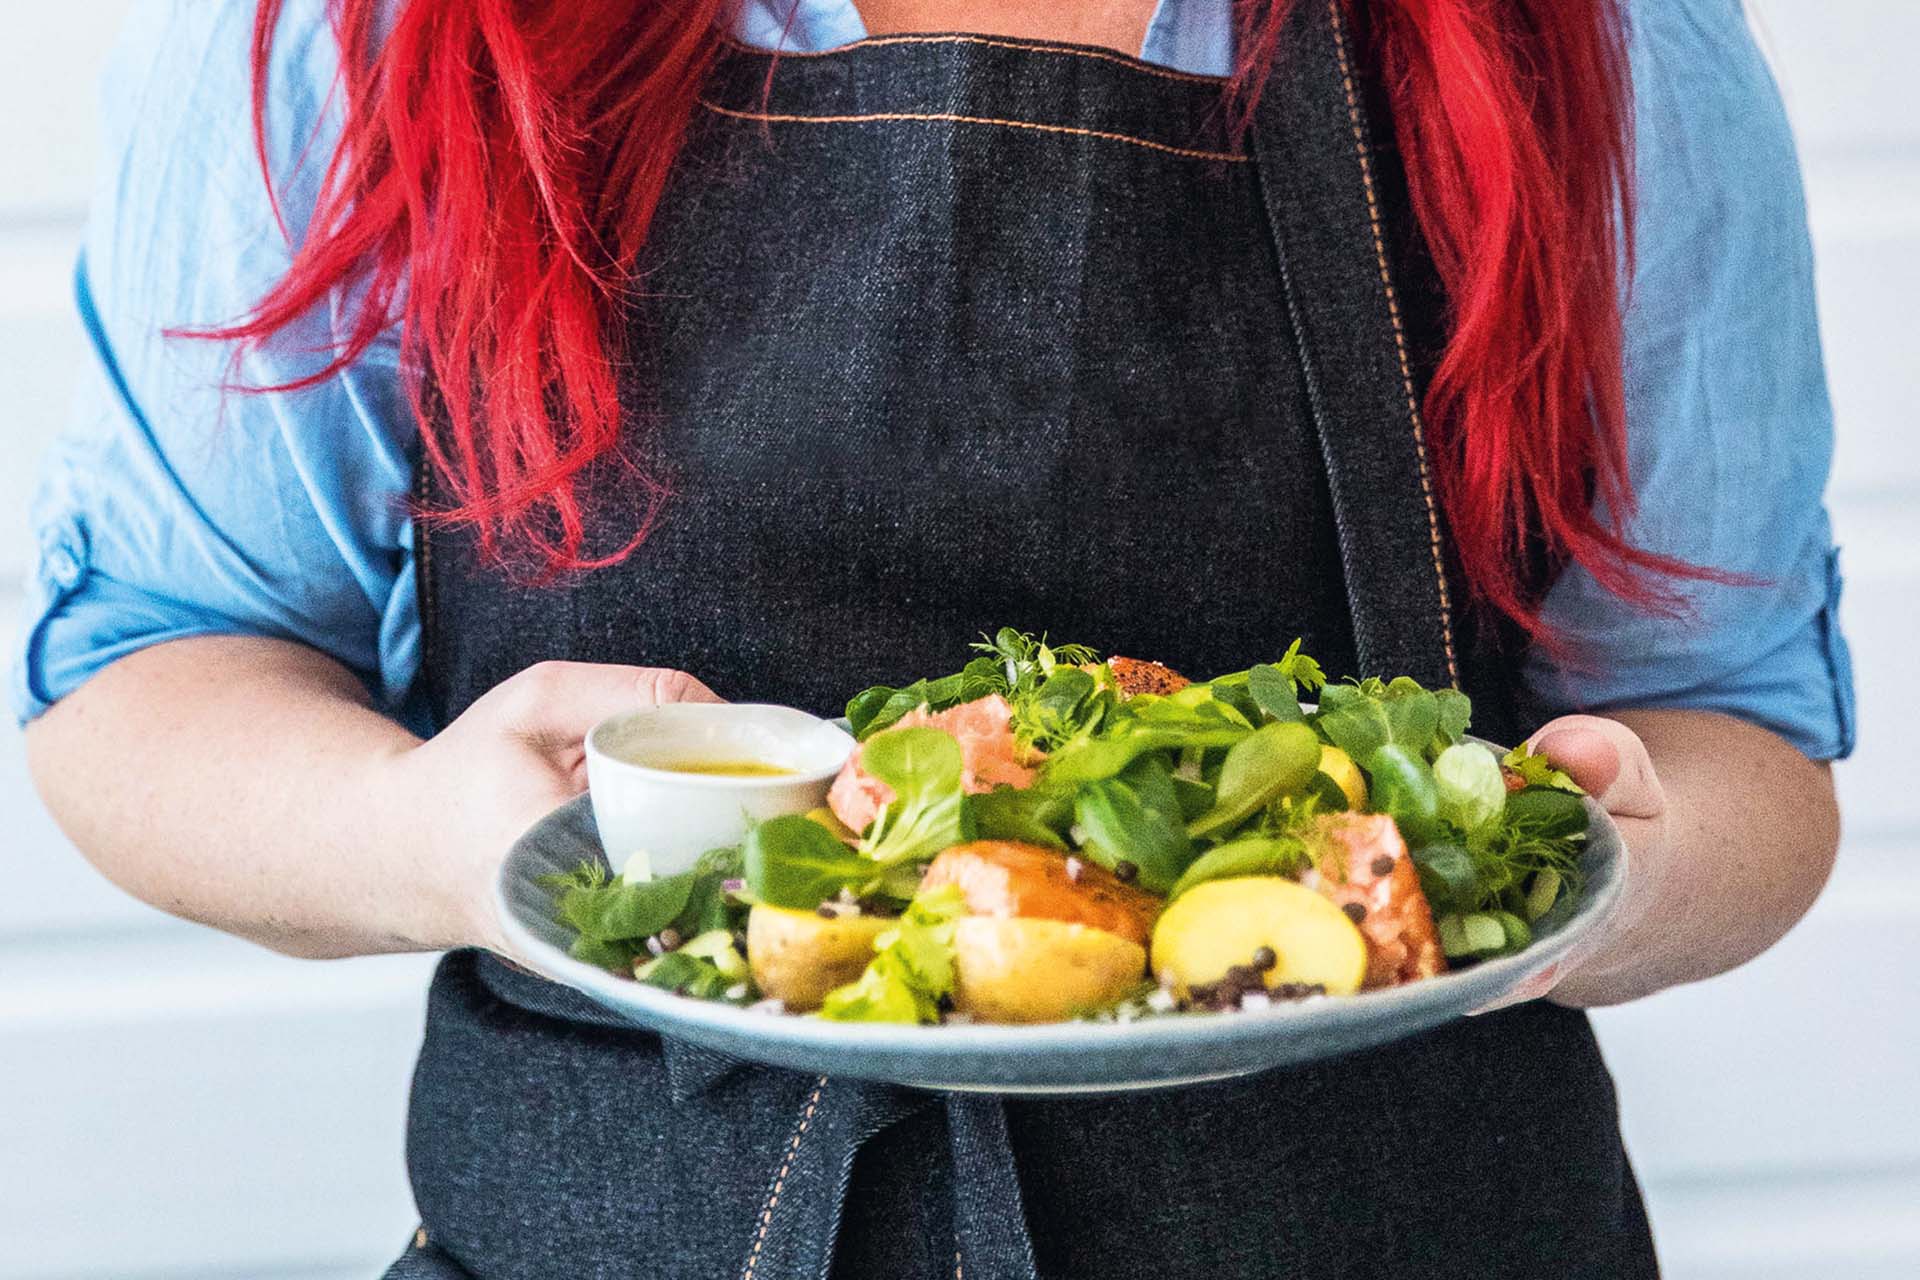 A woman with red hair and an apron is holding a plate of salmon, potatoes and green salad in her hands.